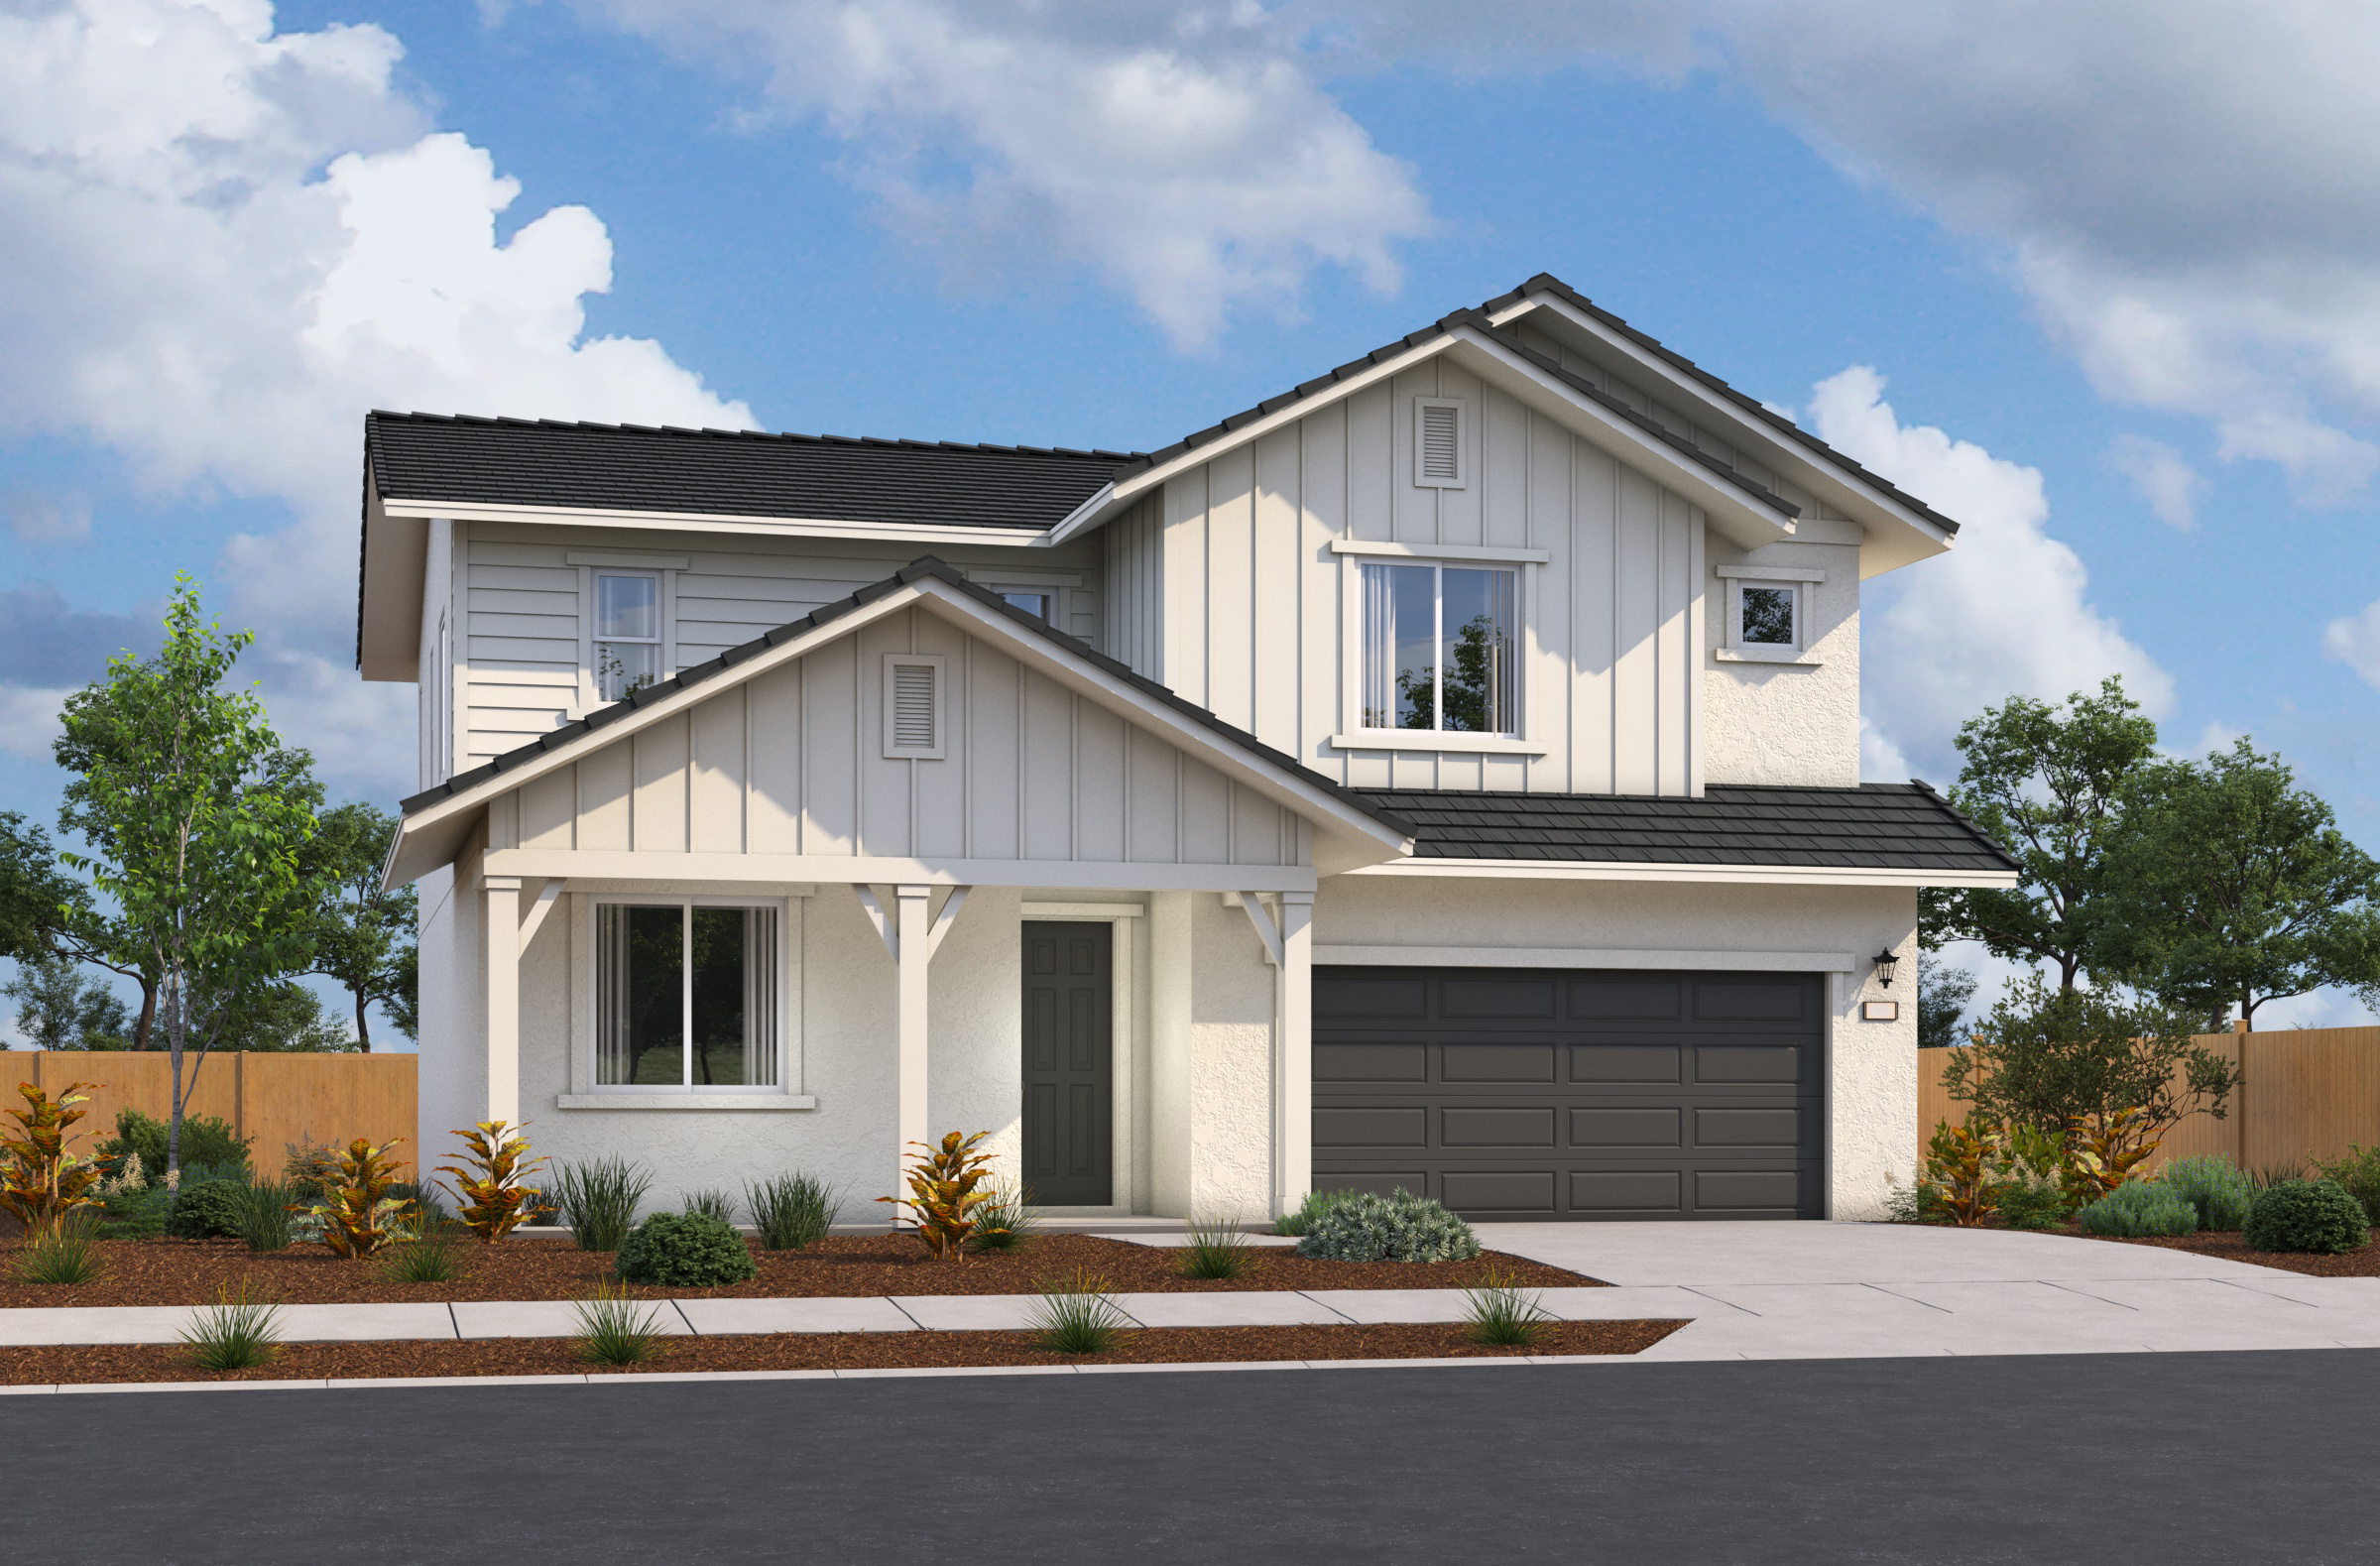 Exterior rendering of a new construction home at Poppy Meadows in Elk Grove, California